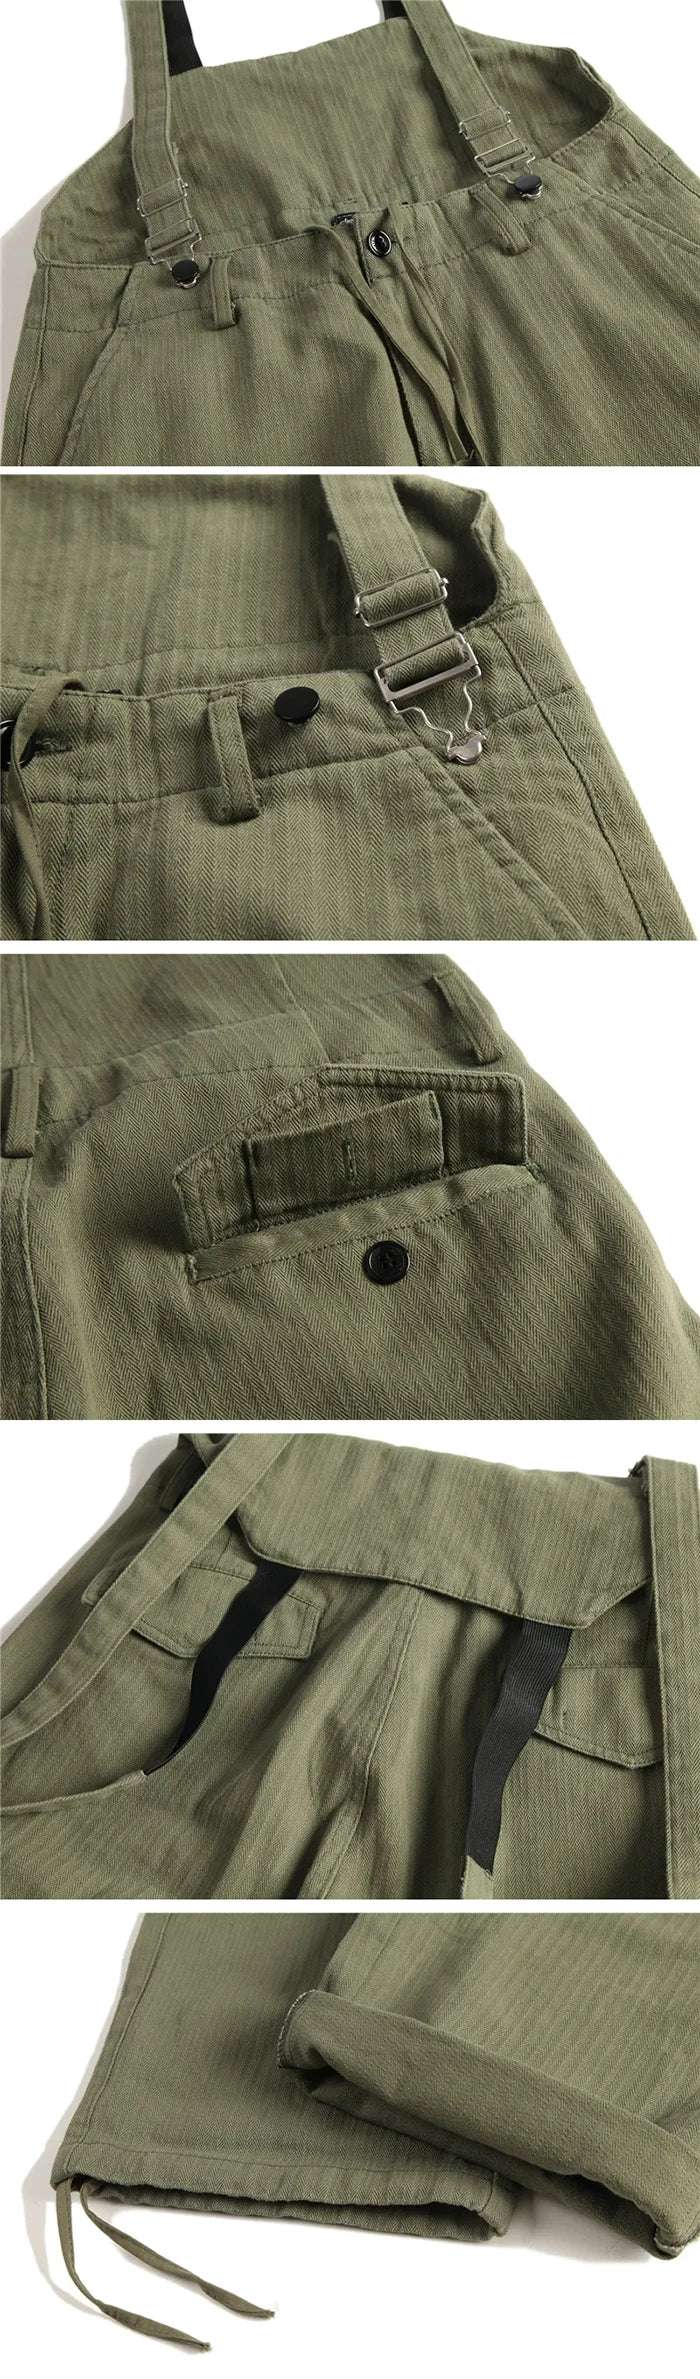 more details of the Cargo pants with suspenders "Midori"